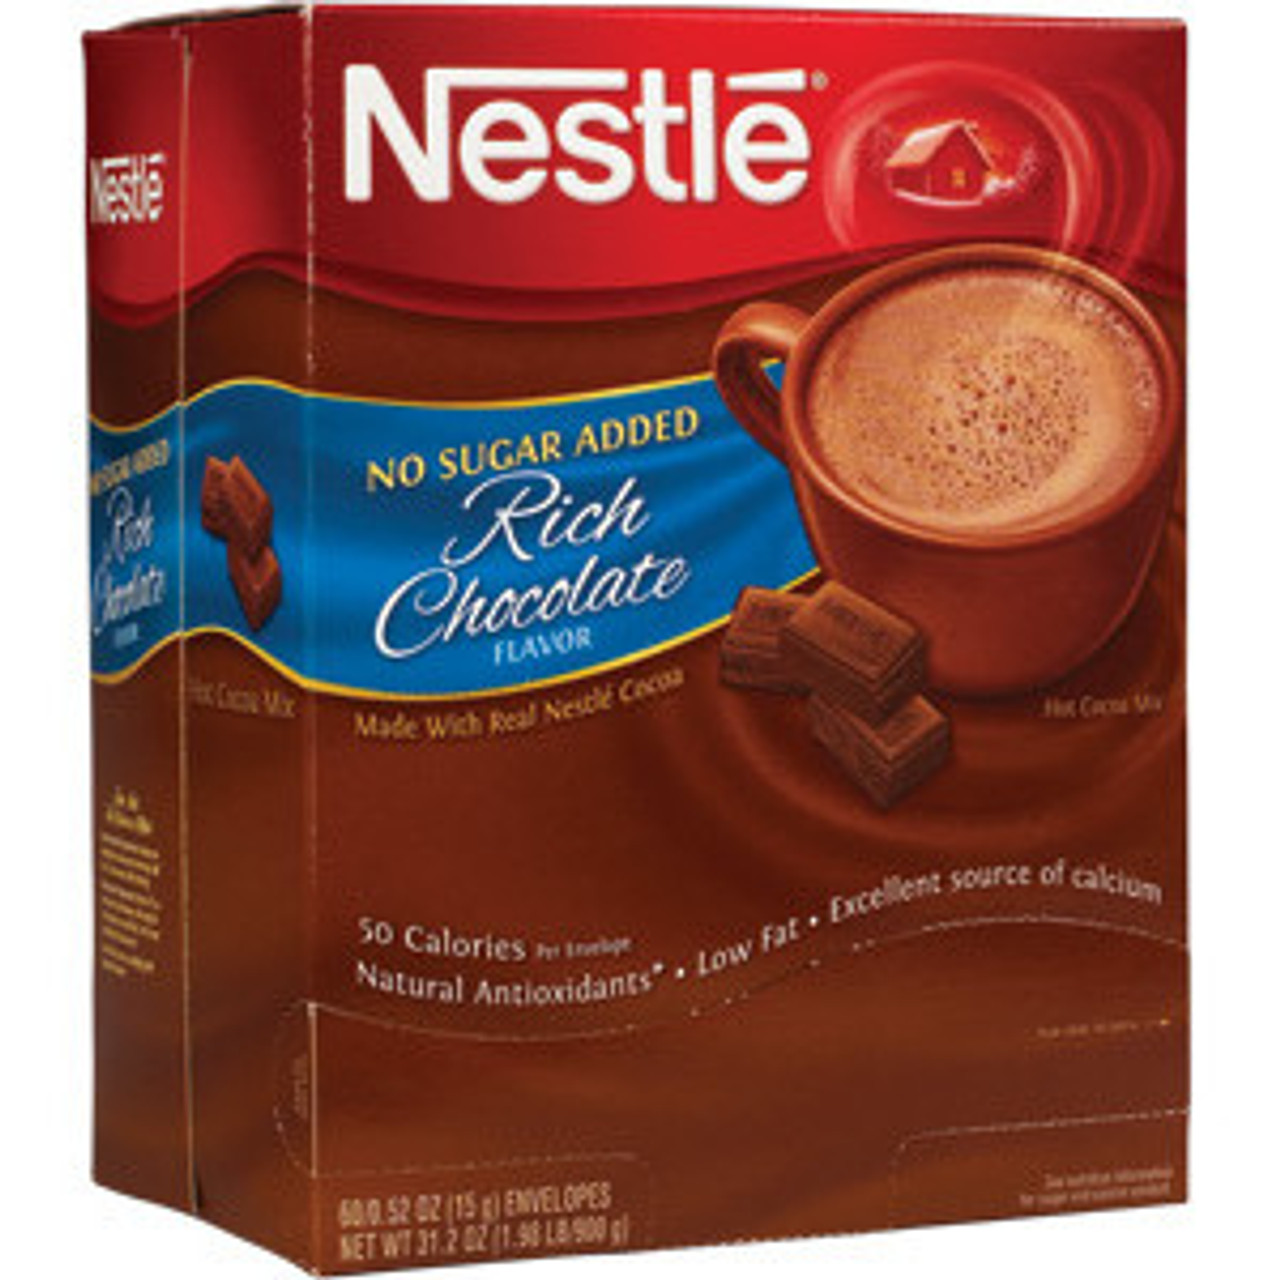 With over 100 years of making chocolatey memories, the chocolate experts at Nestlé bring you a rich, creamy, chocolatey mug of hot cocoa with every packet. This season, create warm connections and memories with loved ones by enjoying a delicious hot cocoa treat anywhere, anytime. 